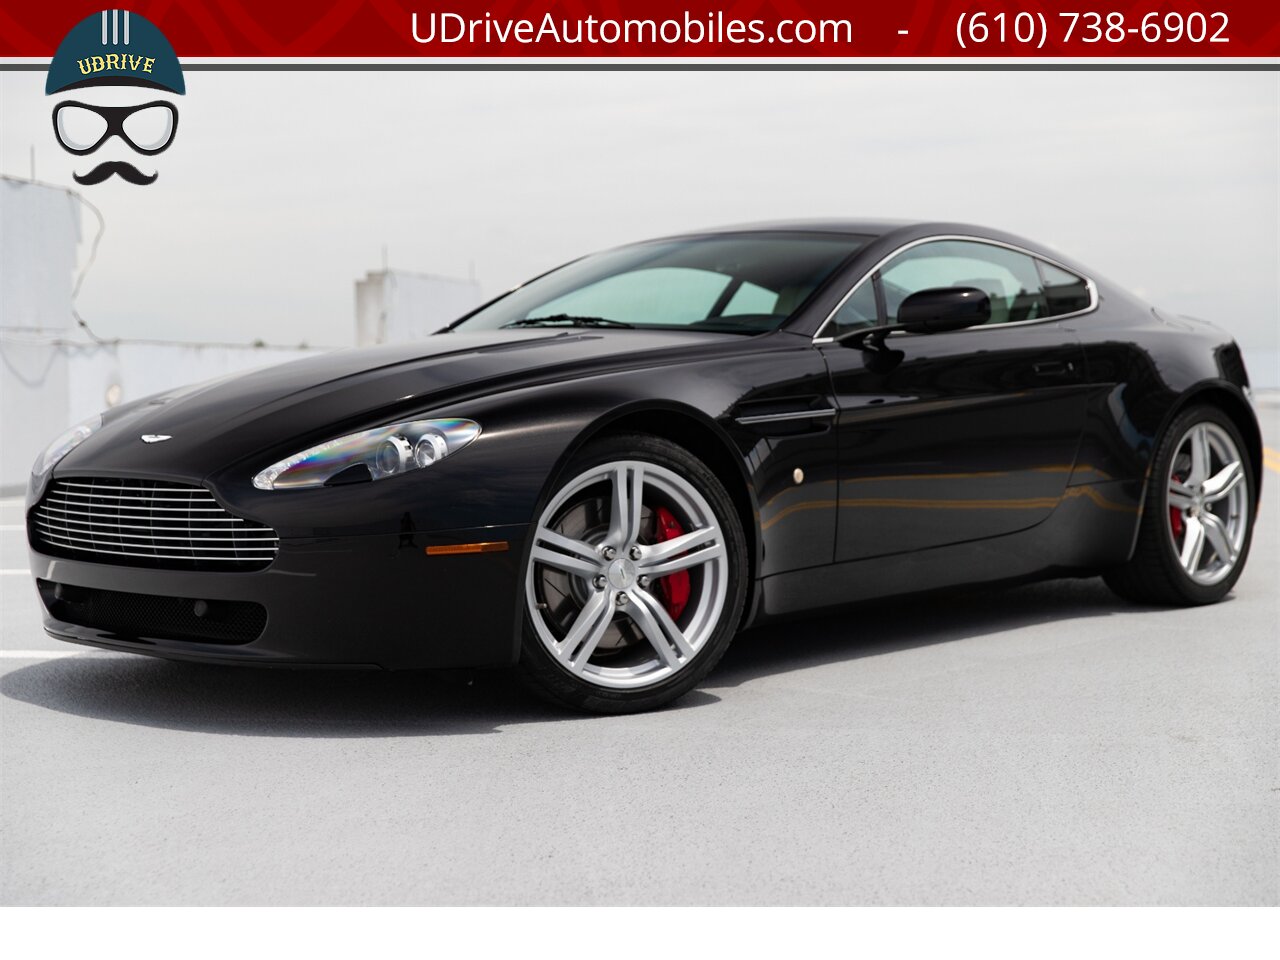 2009 Aston Martin Vantage 6 Speed Manual 1 Owner 12k Miles Sprts Pack NAV  $136,470 MSRP Red Calipers - Photo 1 - West Chester, PA 19382